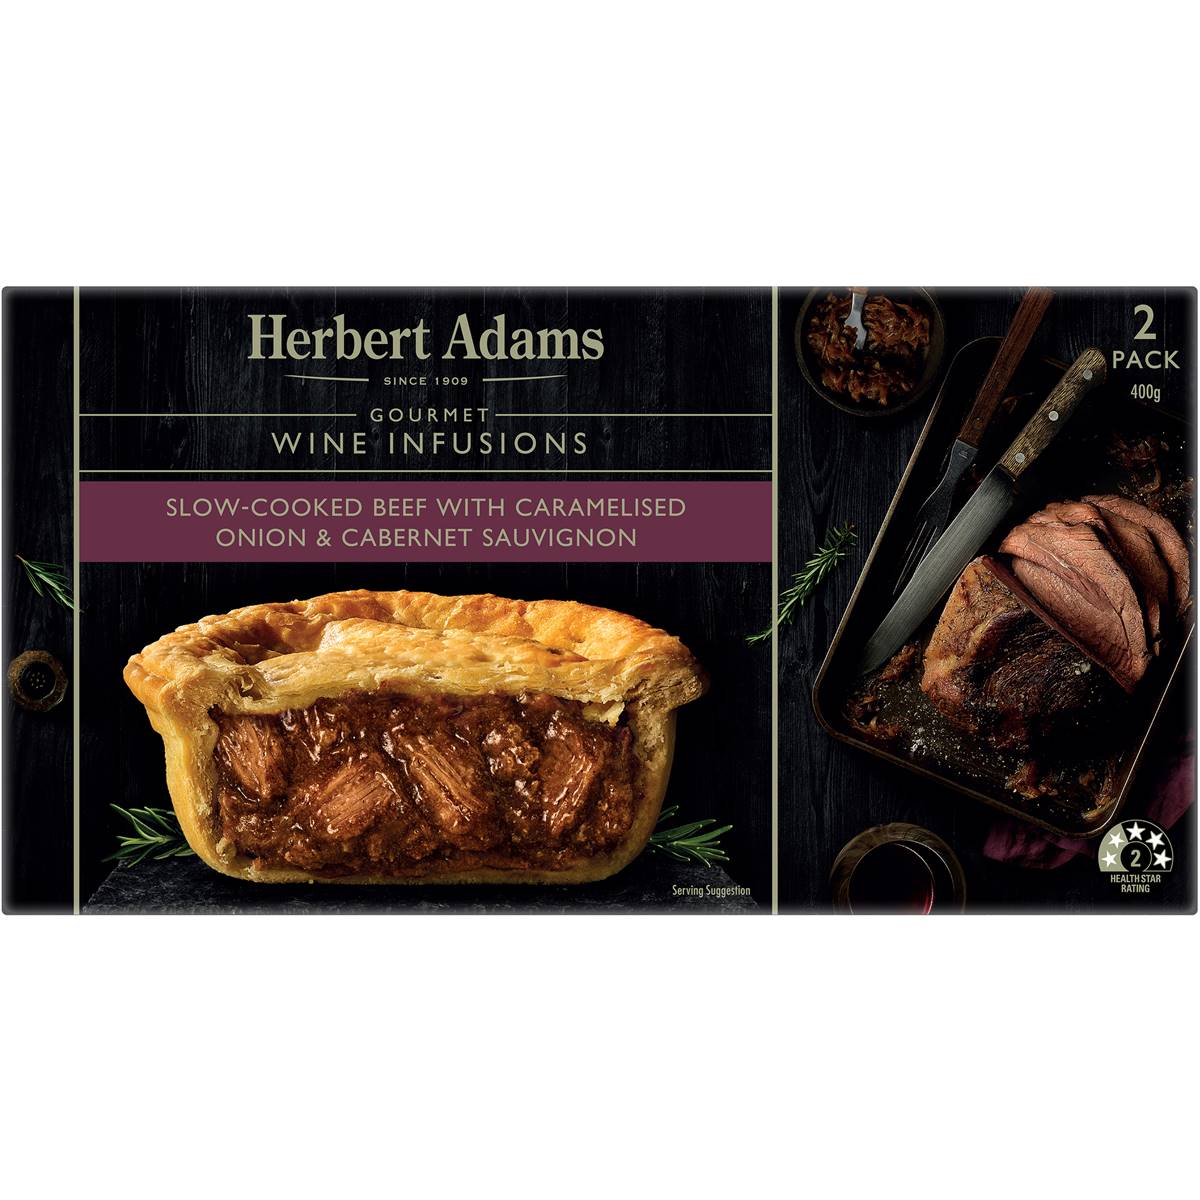 Herbert Adams Slow Cooked Beef, Caramelised Onion & Cabernet Sauvignon 2 Pack